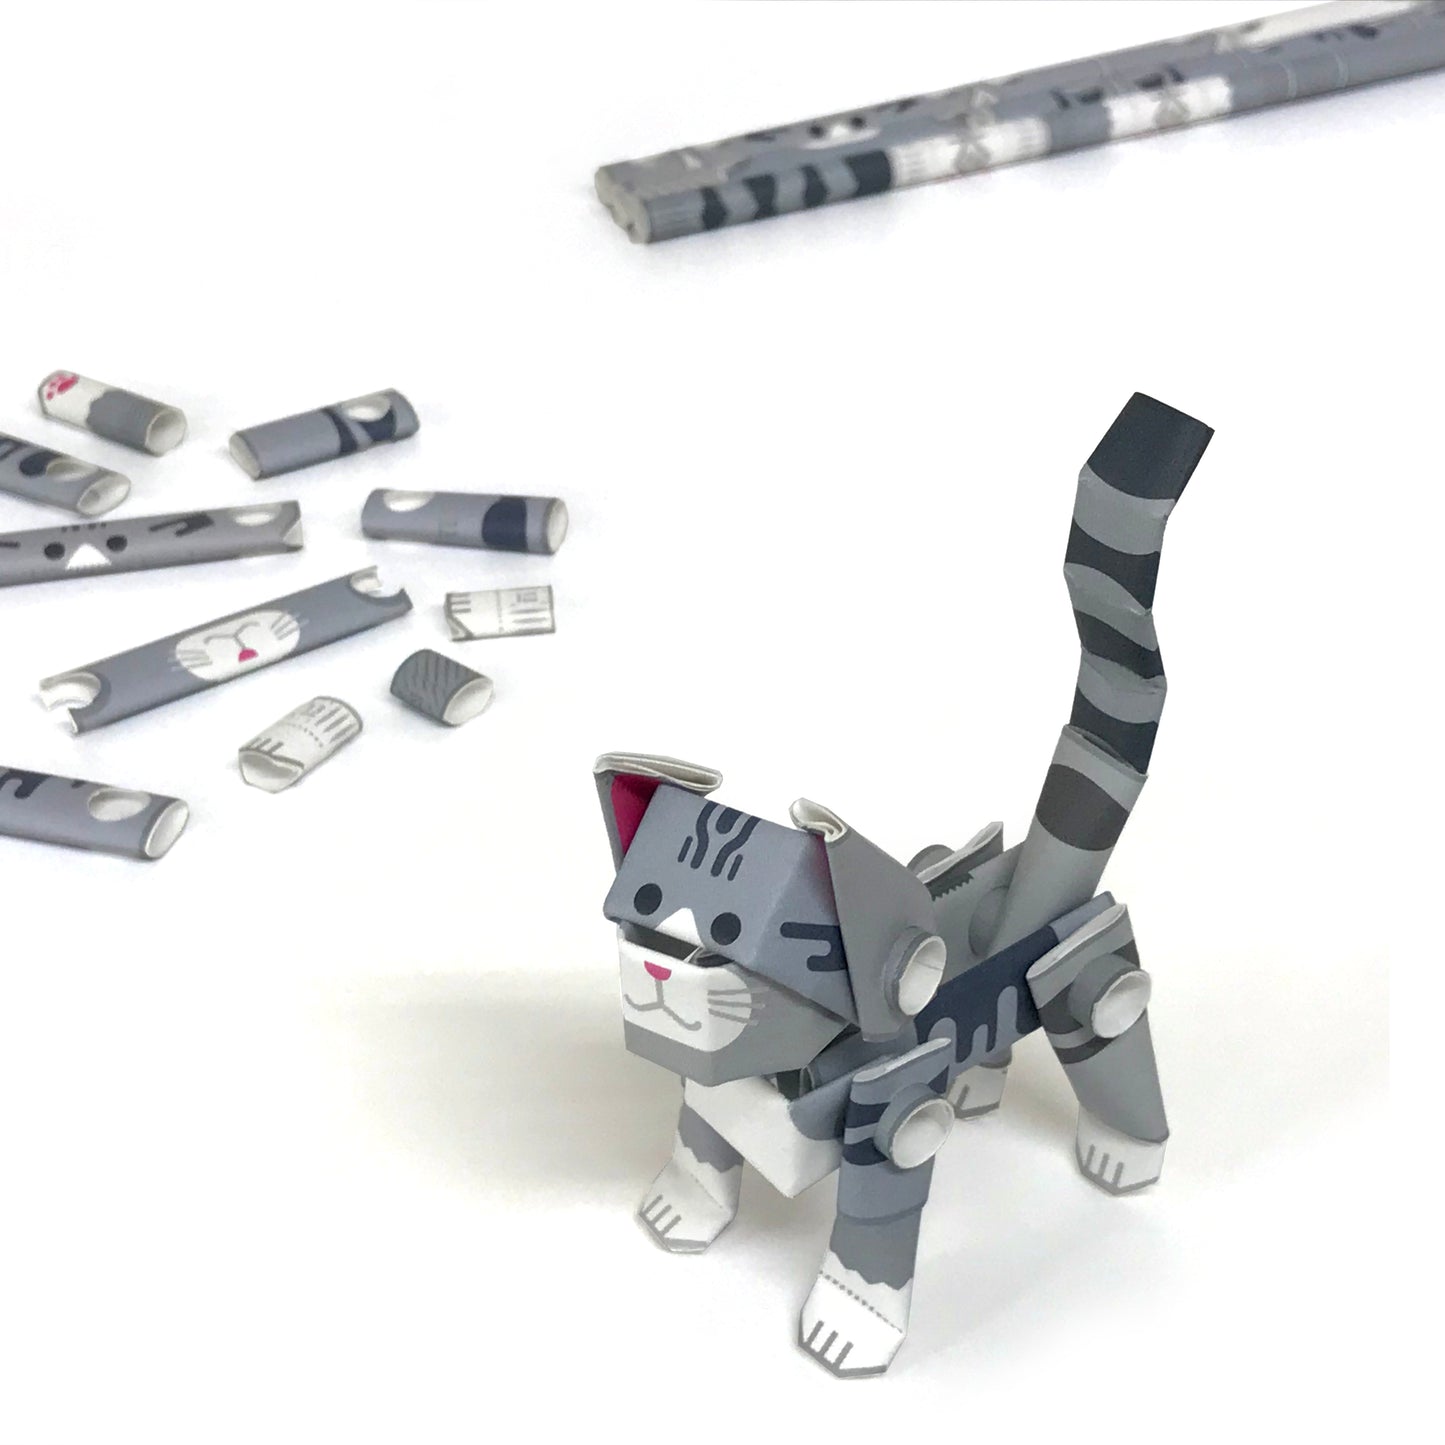 Components of the kit of make your own cat from Piperoid with completed product